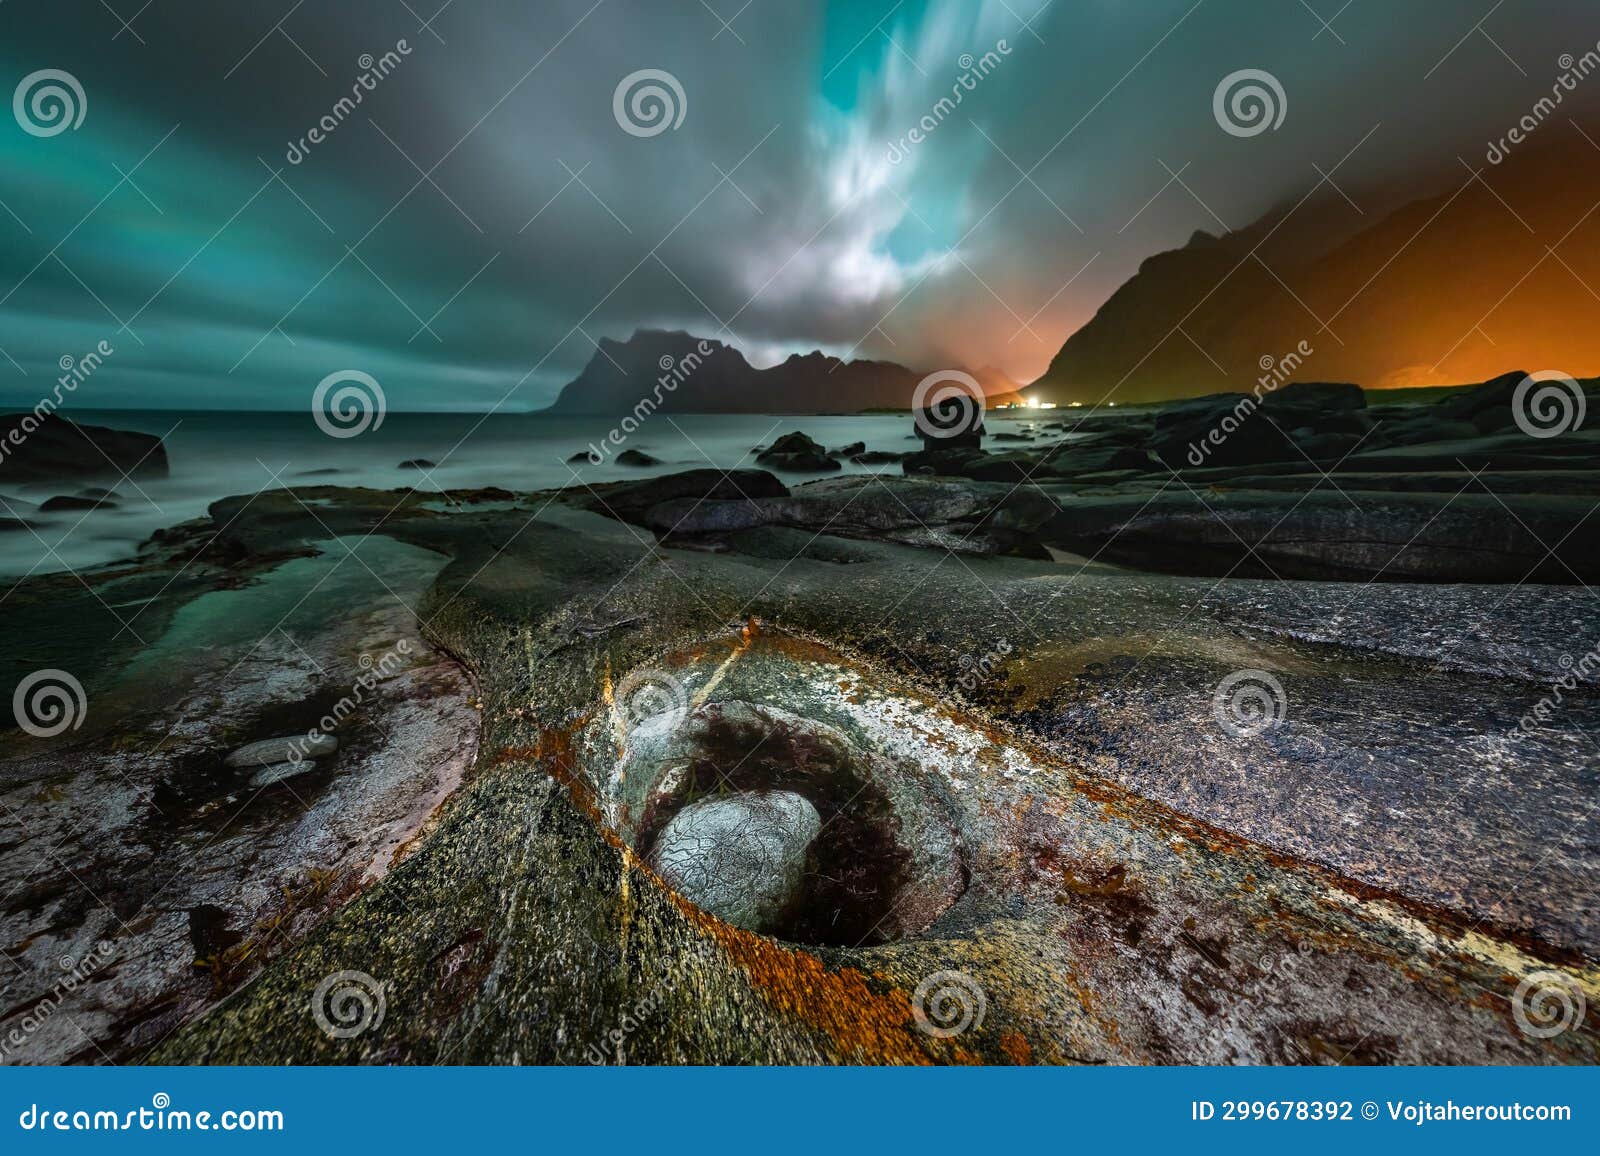 overcast sky lit by aurora borealis over the famous rock formation, dragon's eye